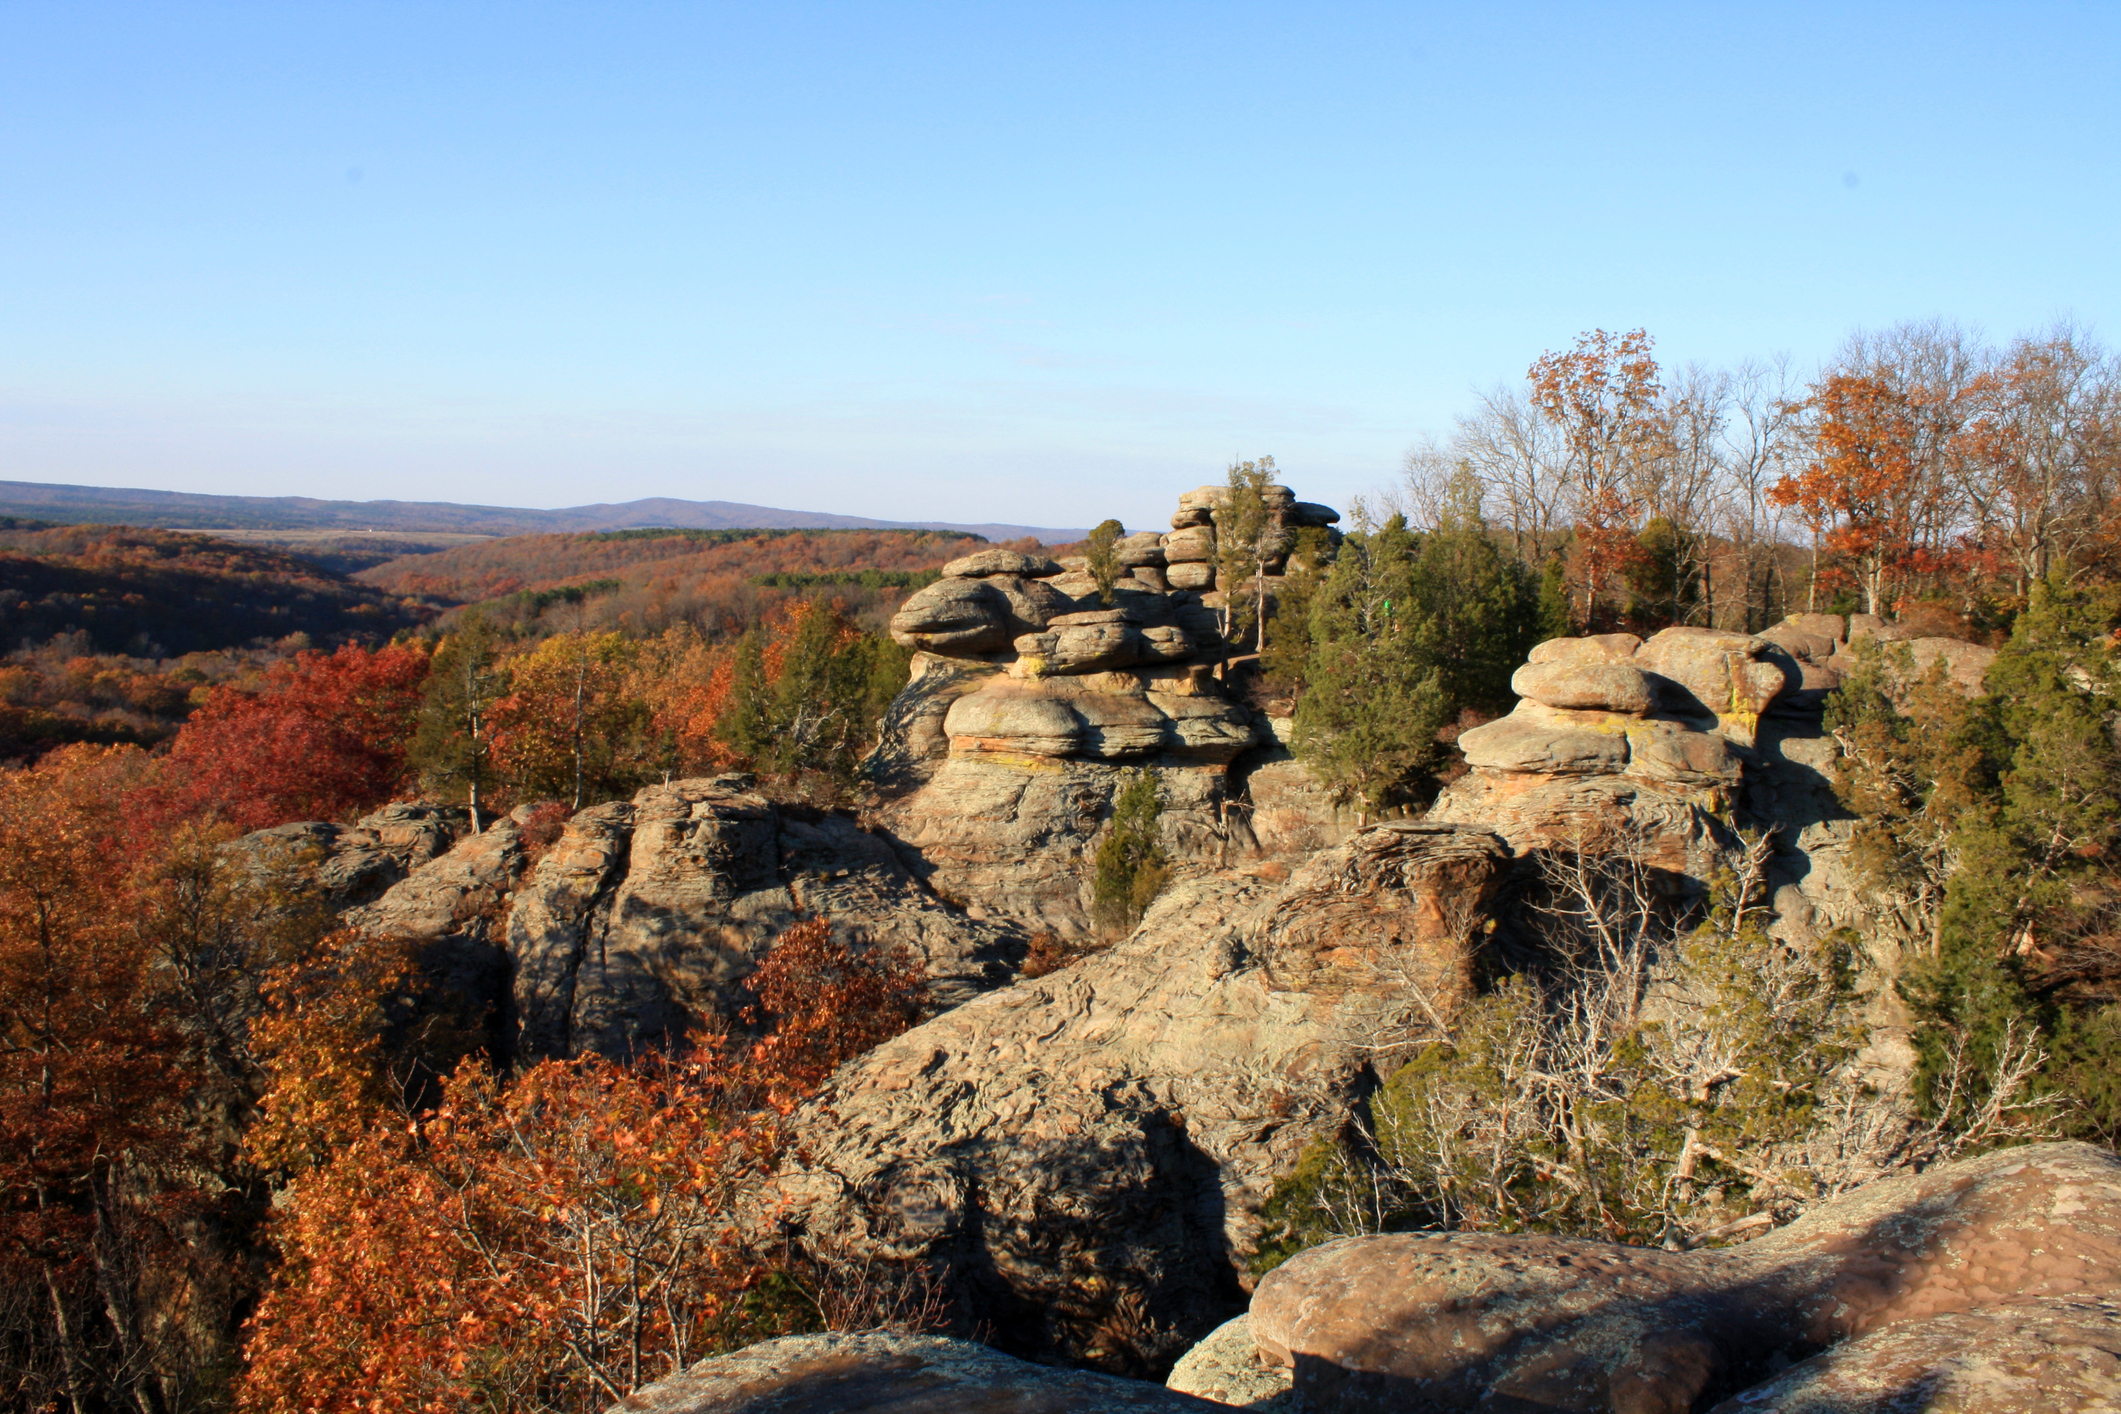 A unique rock formation at Garden of the Gods is surrounded by bright fall colors in Shawnee National Forest.